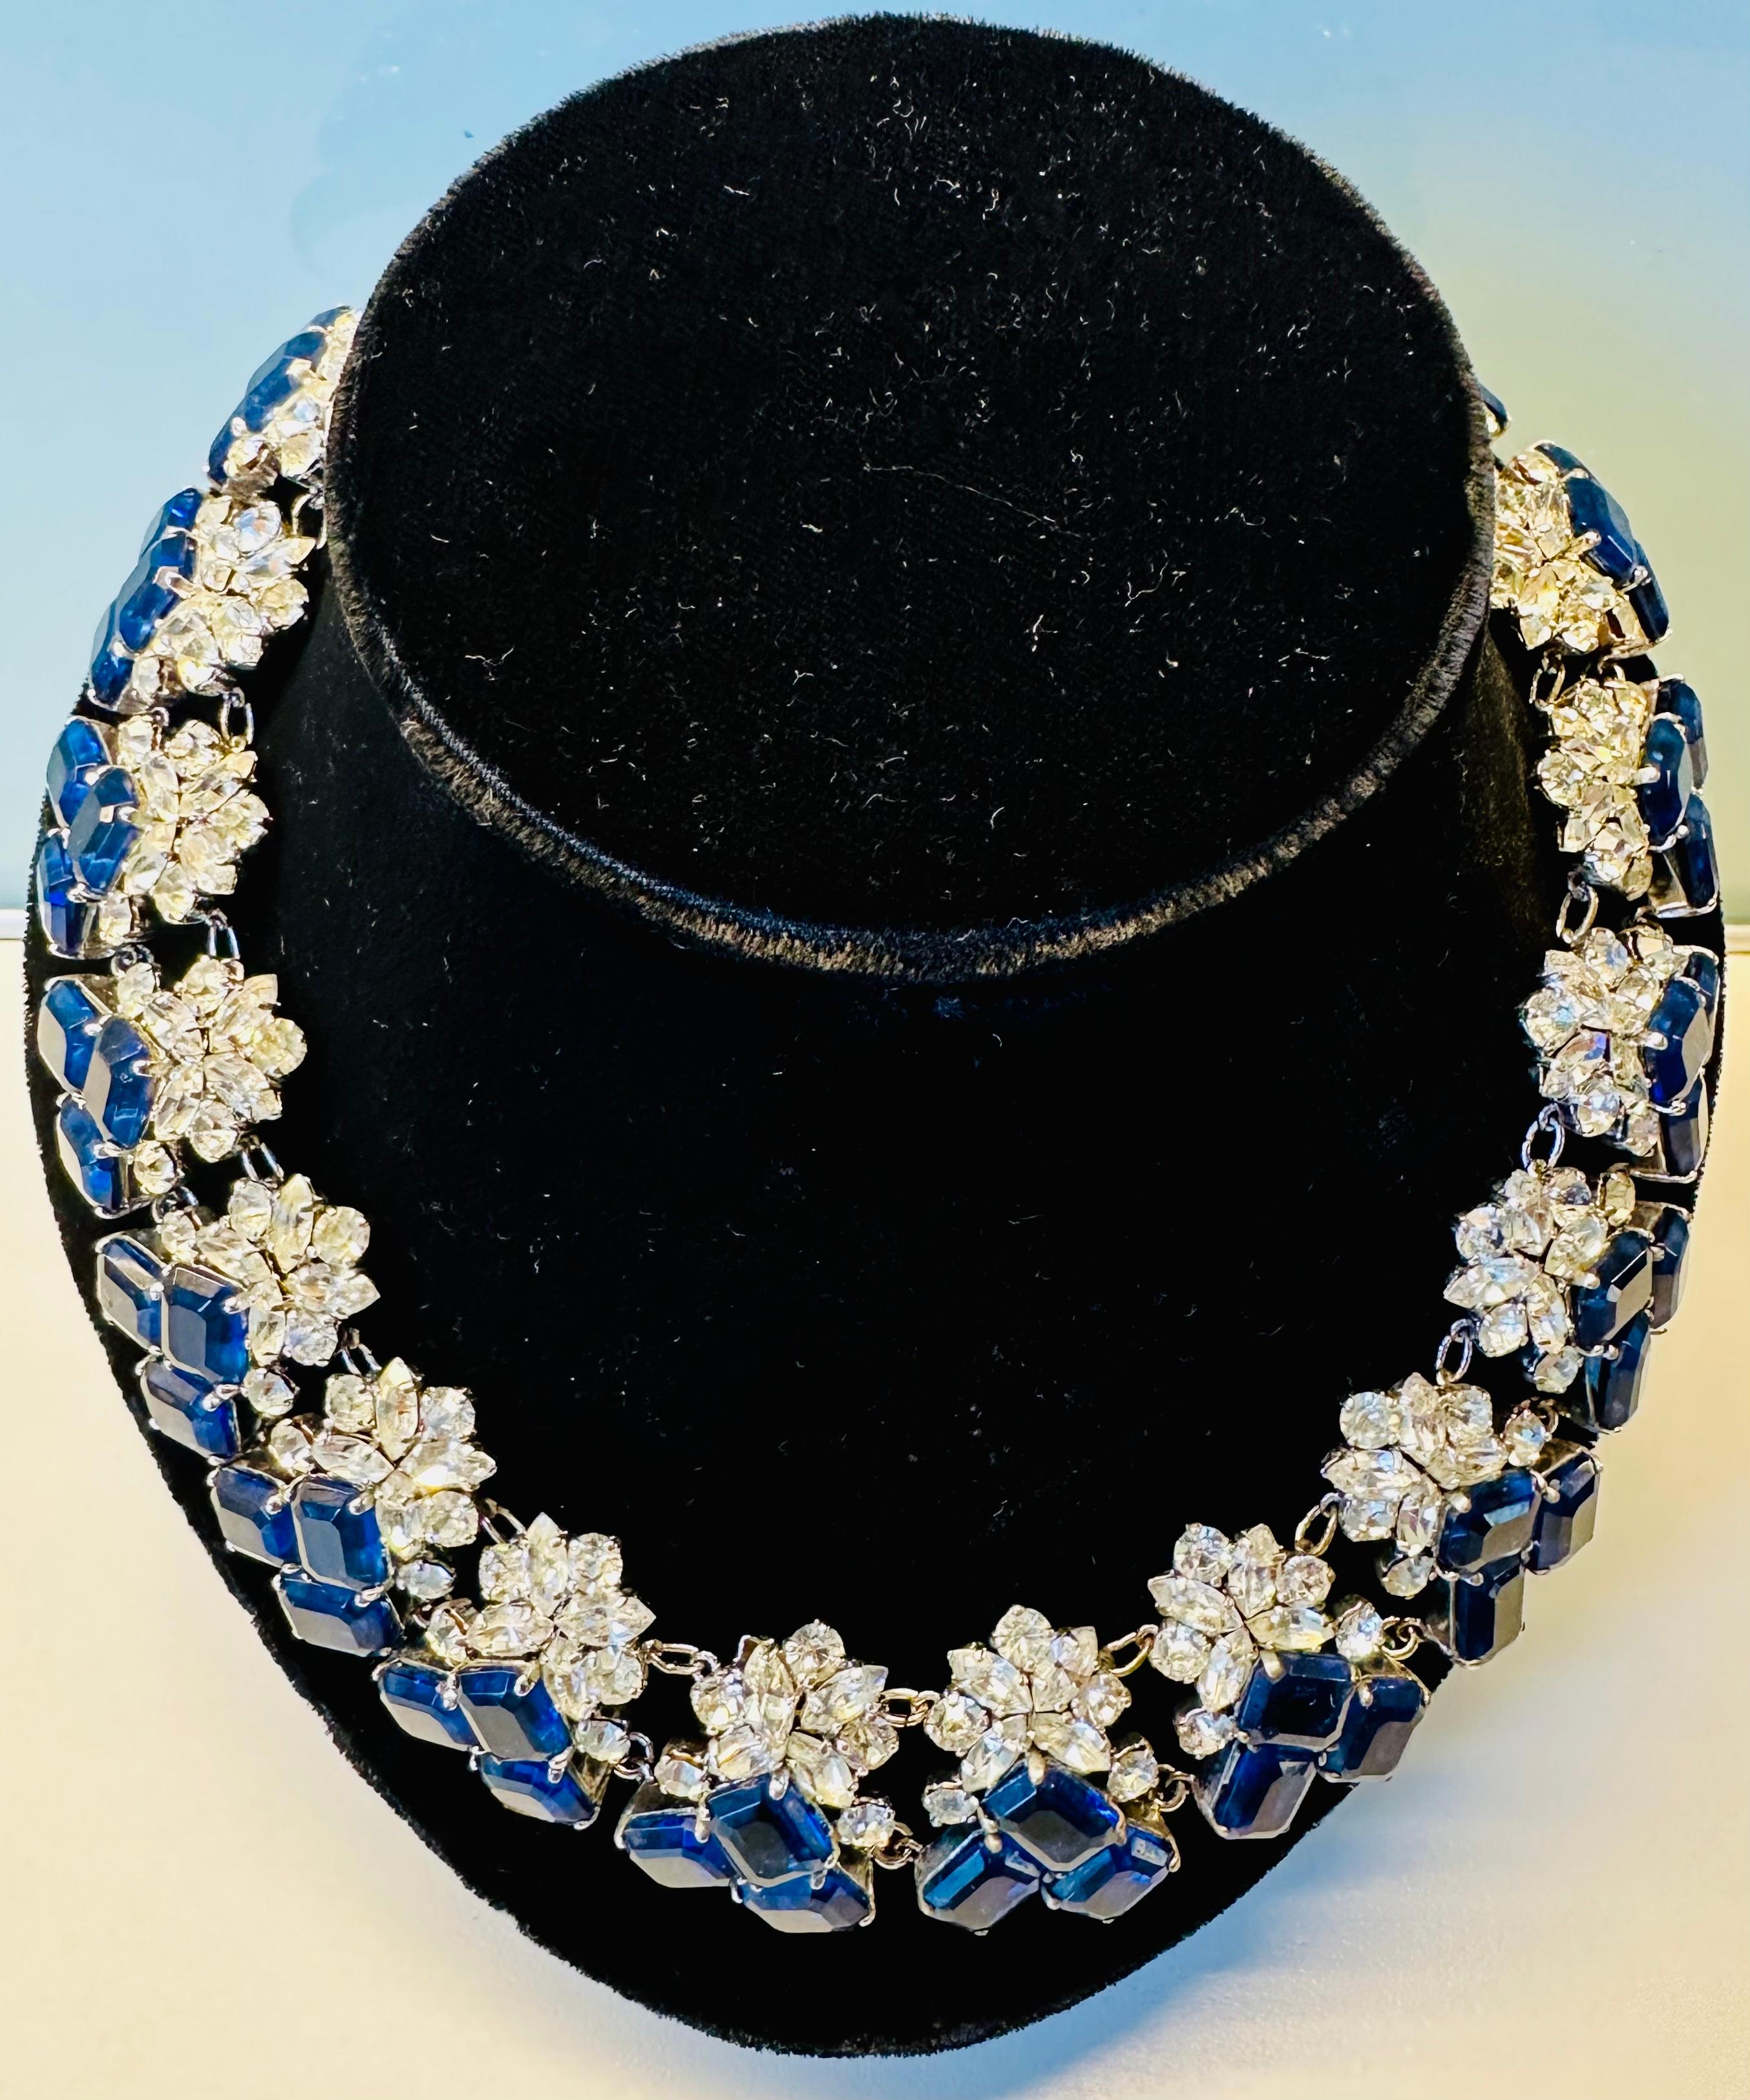 An absolutely stunning early example of a 1960s Christian Dior necklace, with prong-set blue and clear crystals.  The necklace is a classic example of Dior's elegant and sophisticated design and is made with a series of blue and clear crystals that